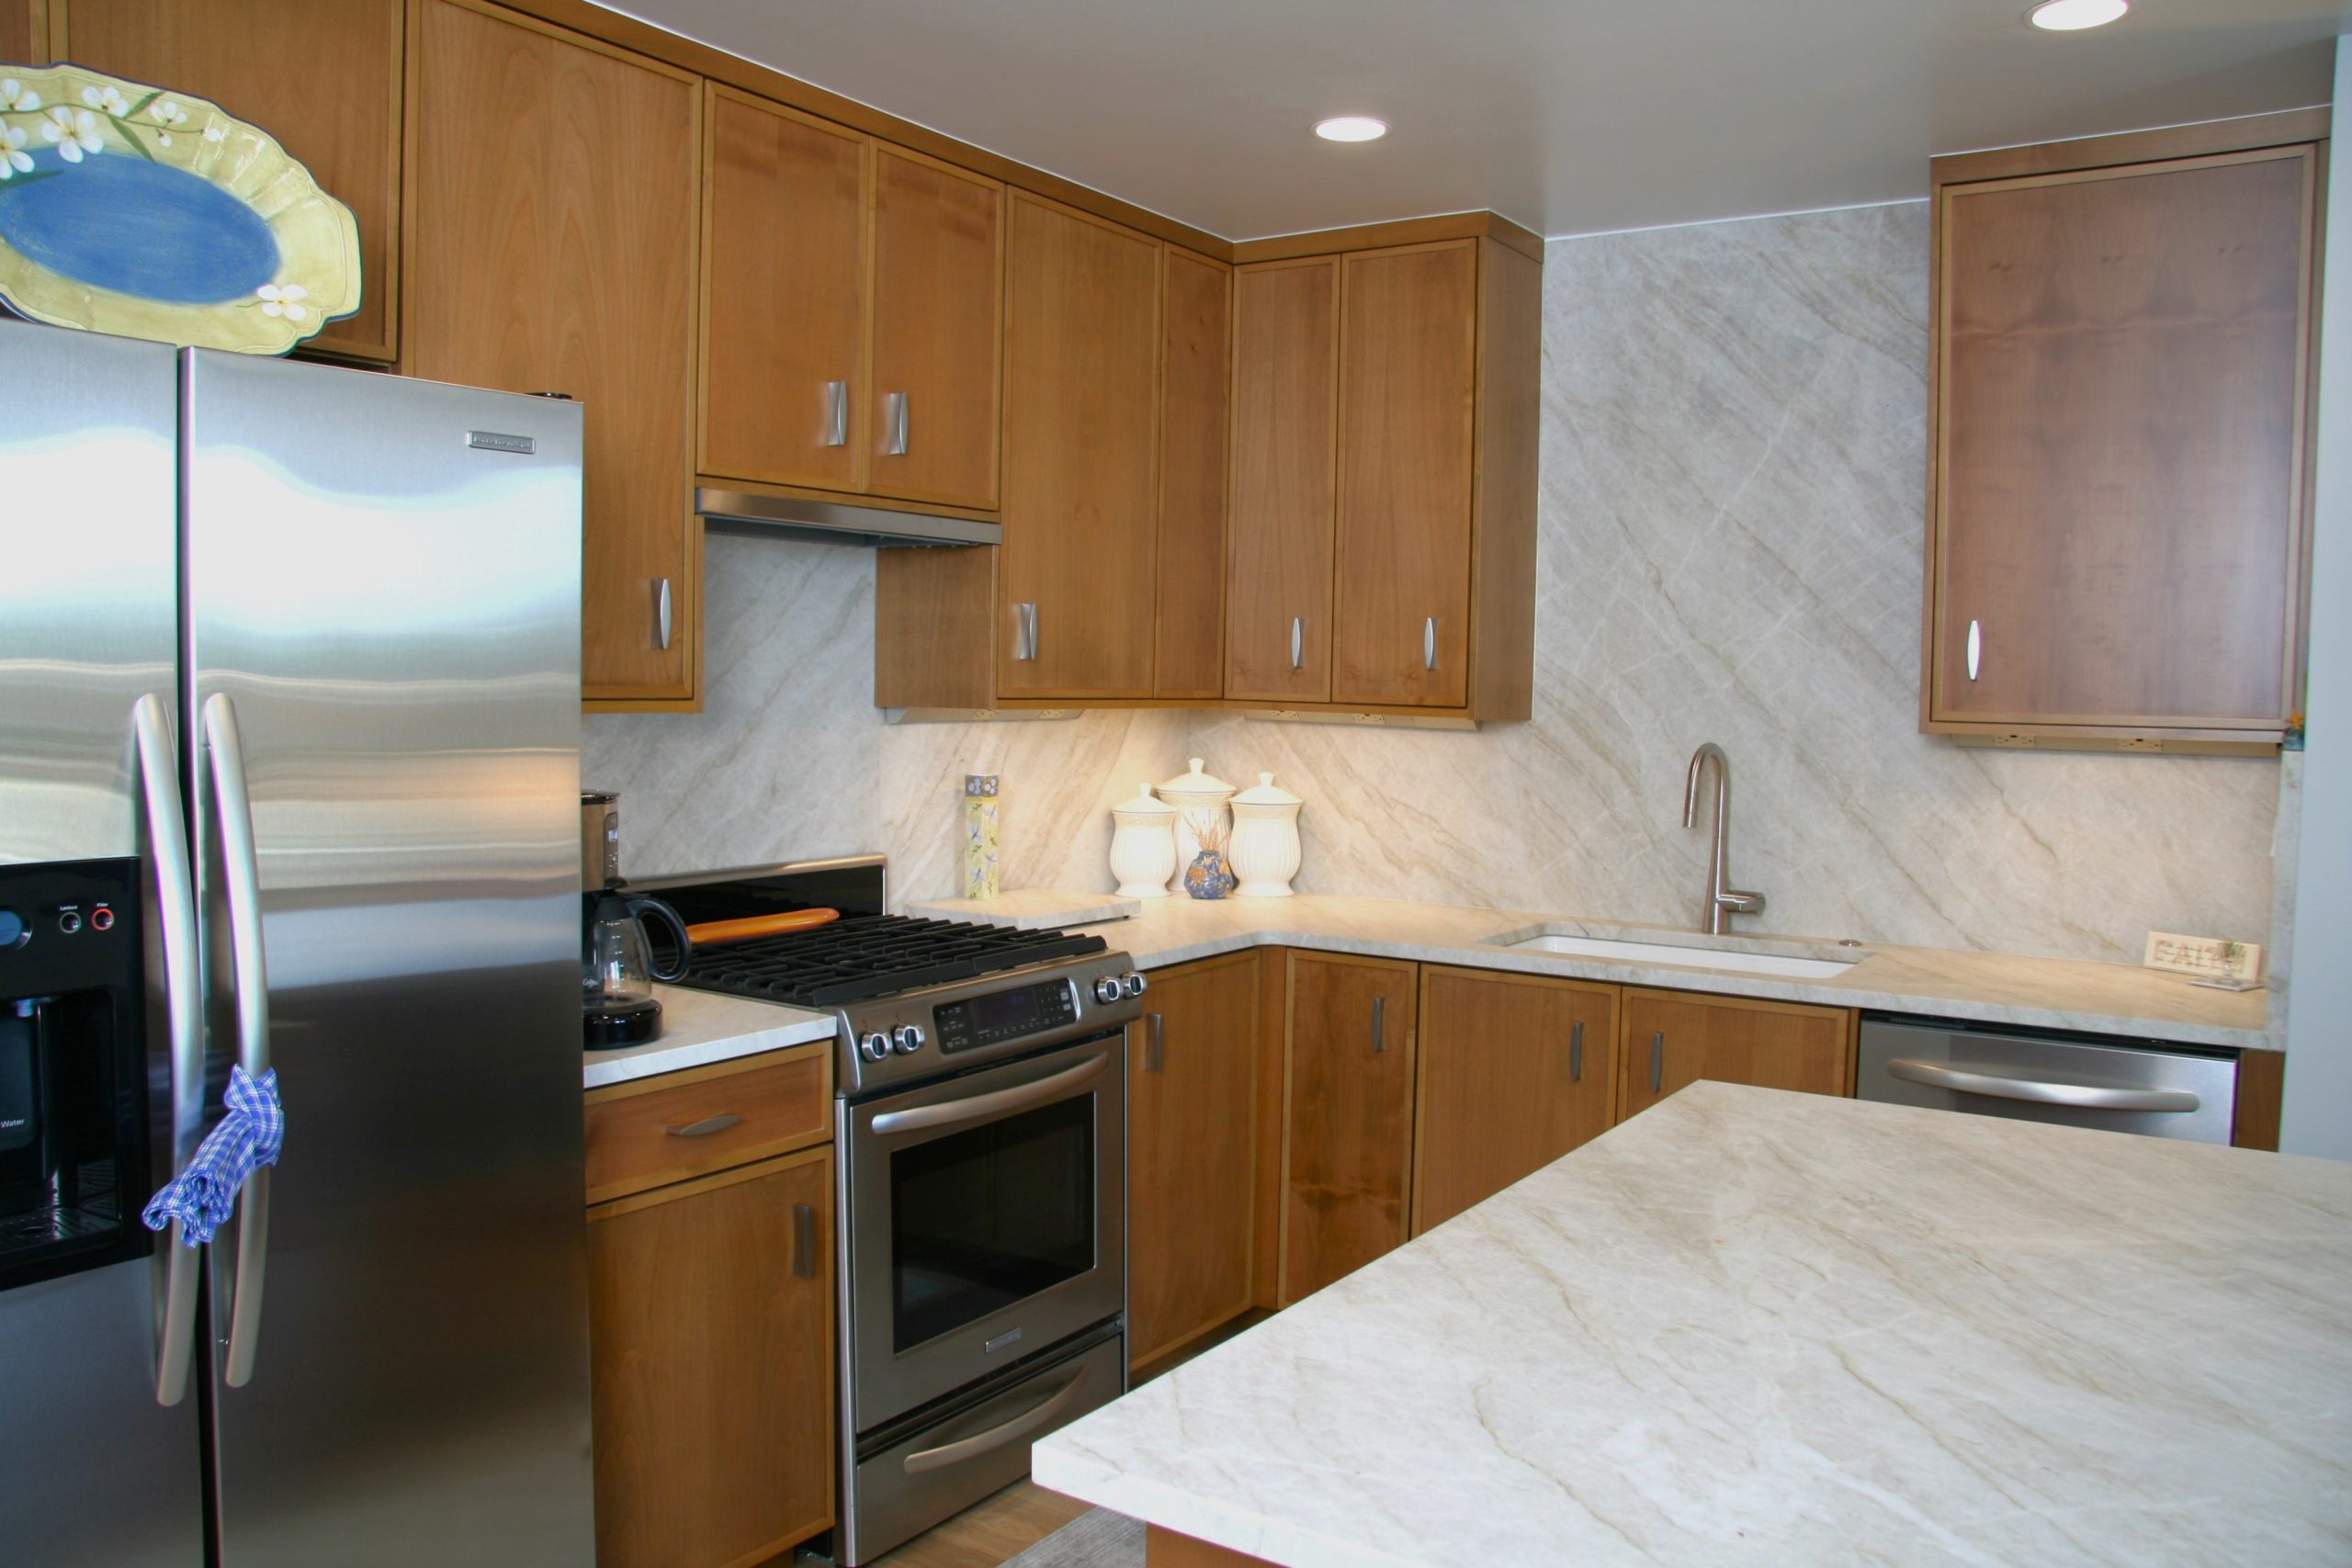 Updated kitchen cabinetry in Boulder